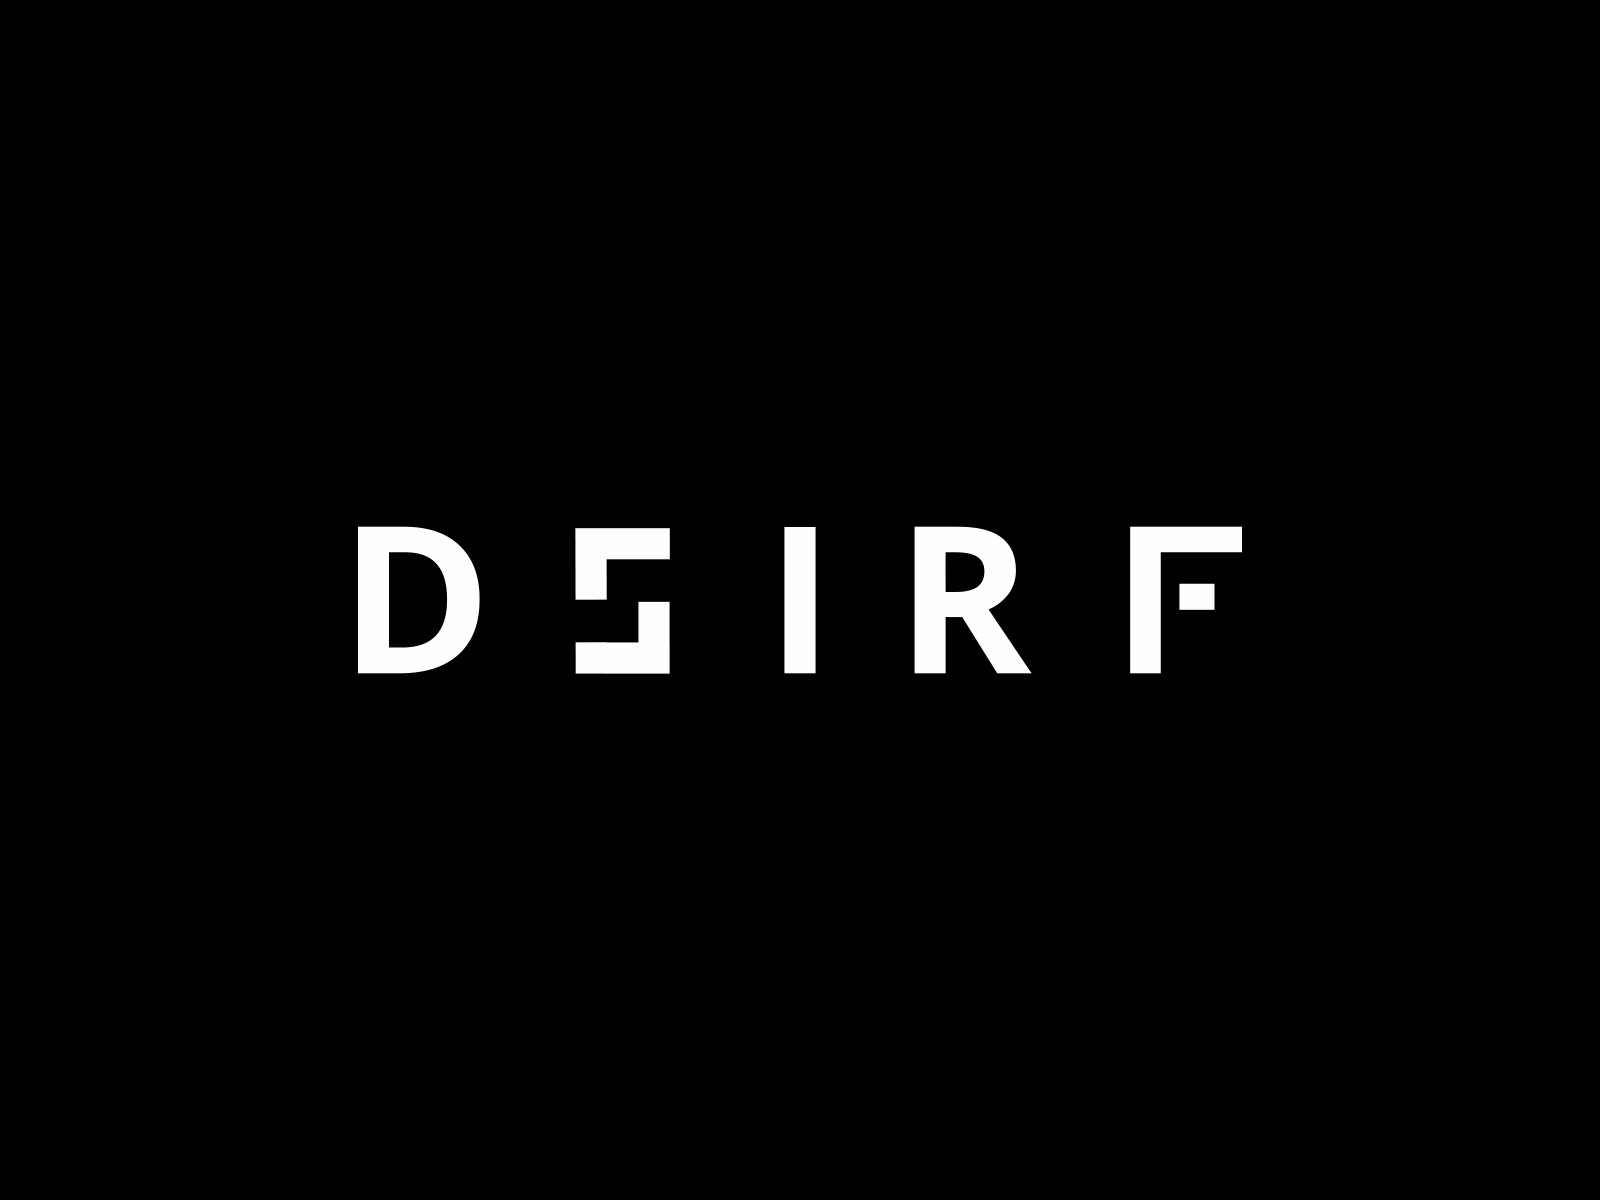 DSIRF - Logo Animation 2d after effects alexgoo animated logo brand animation code development logo animation logo intro logo reveal motion graphics seamless loop typography animation